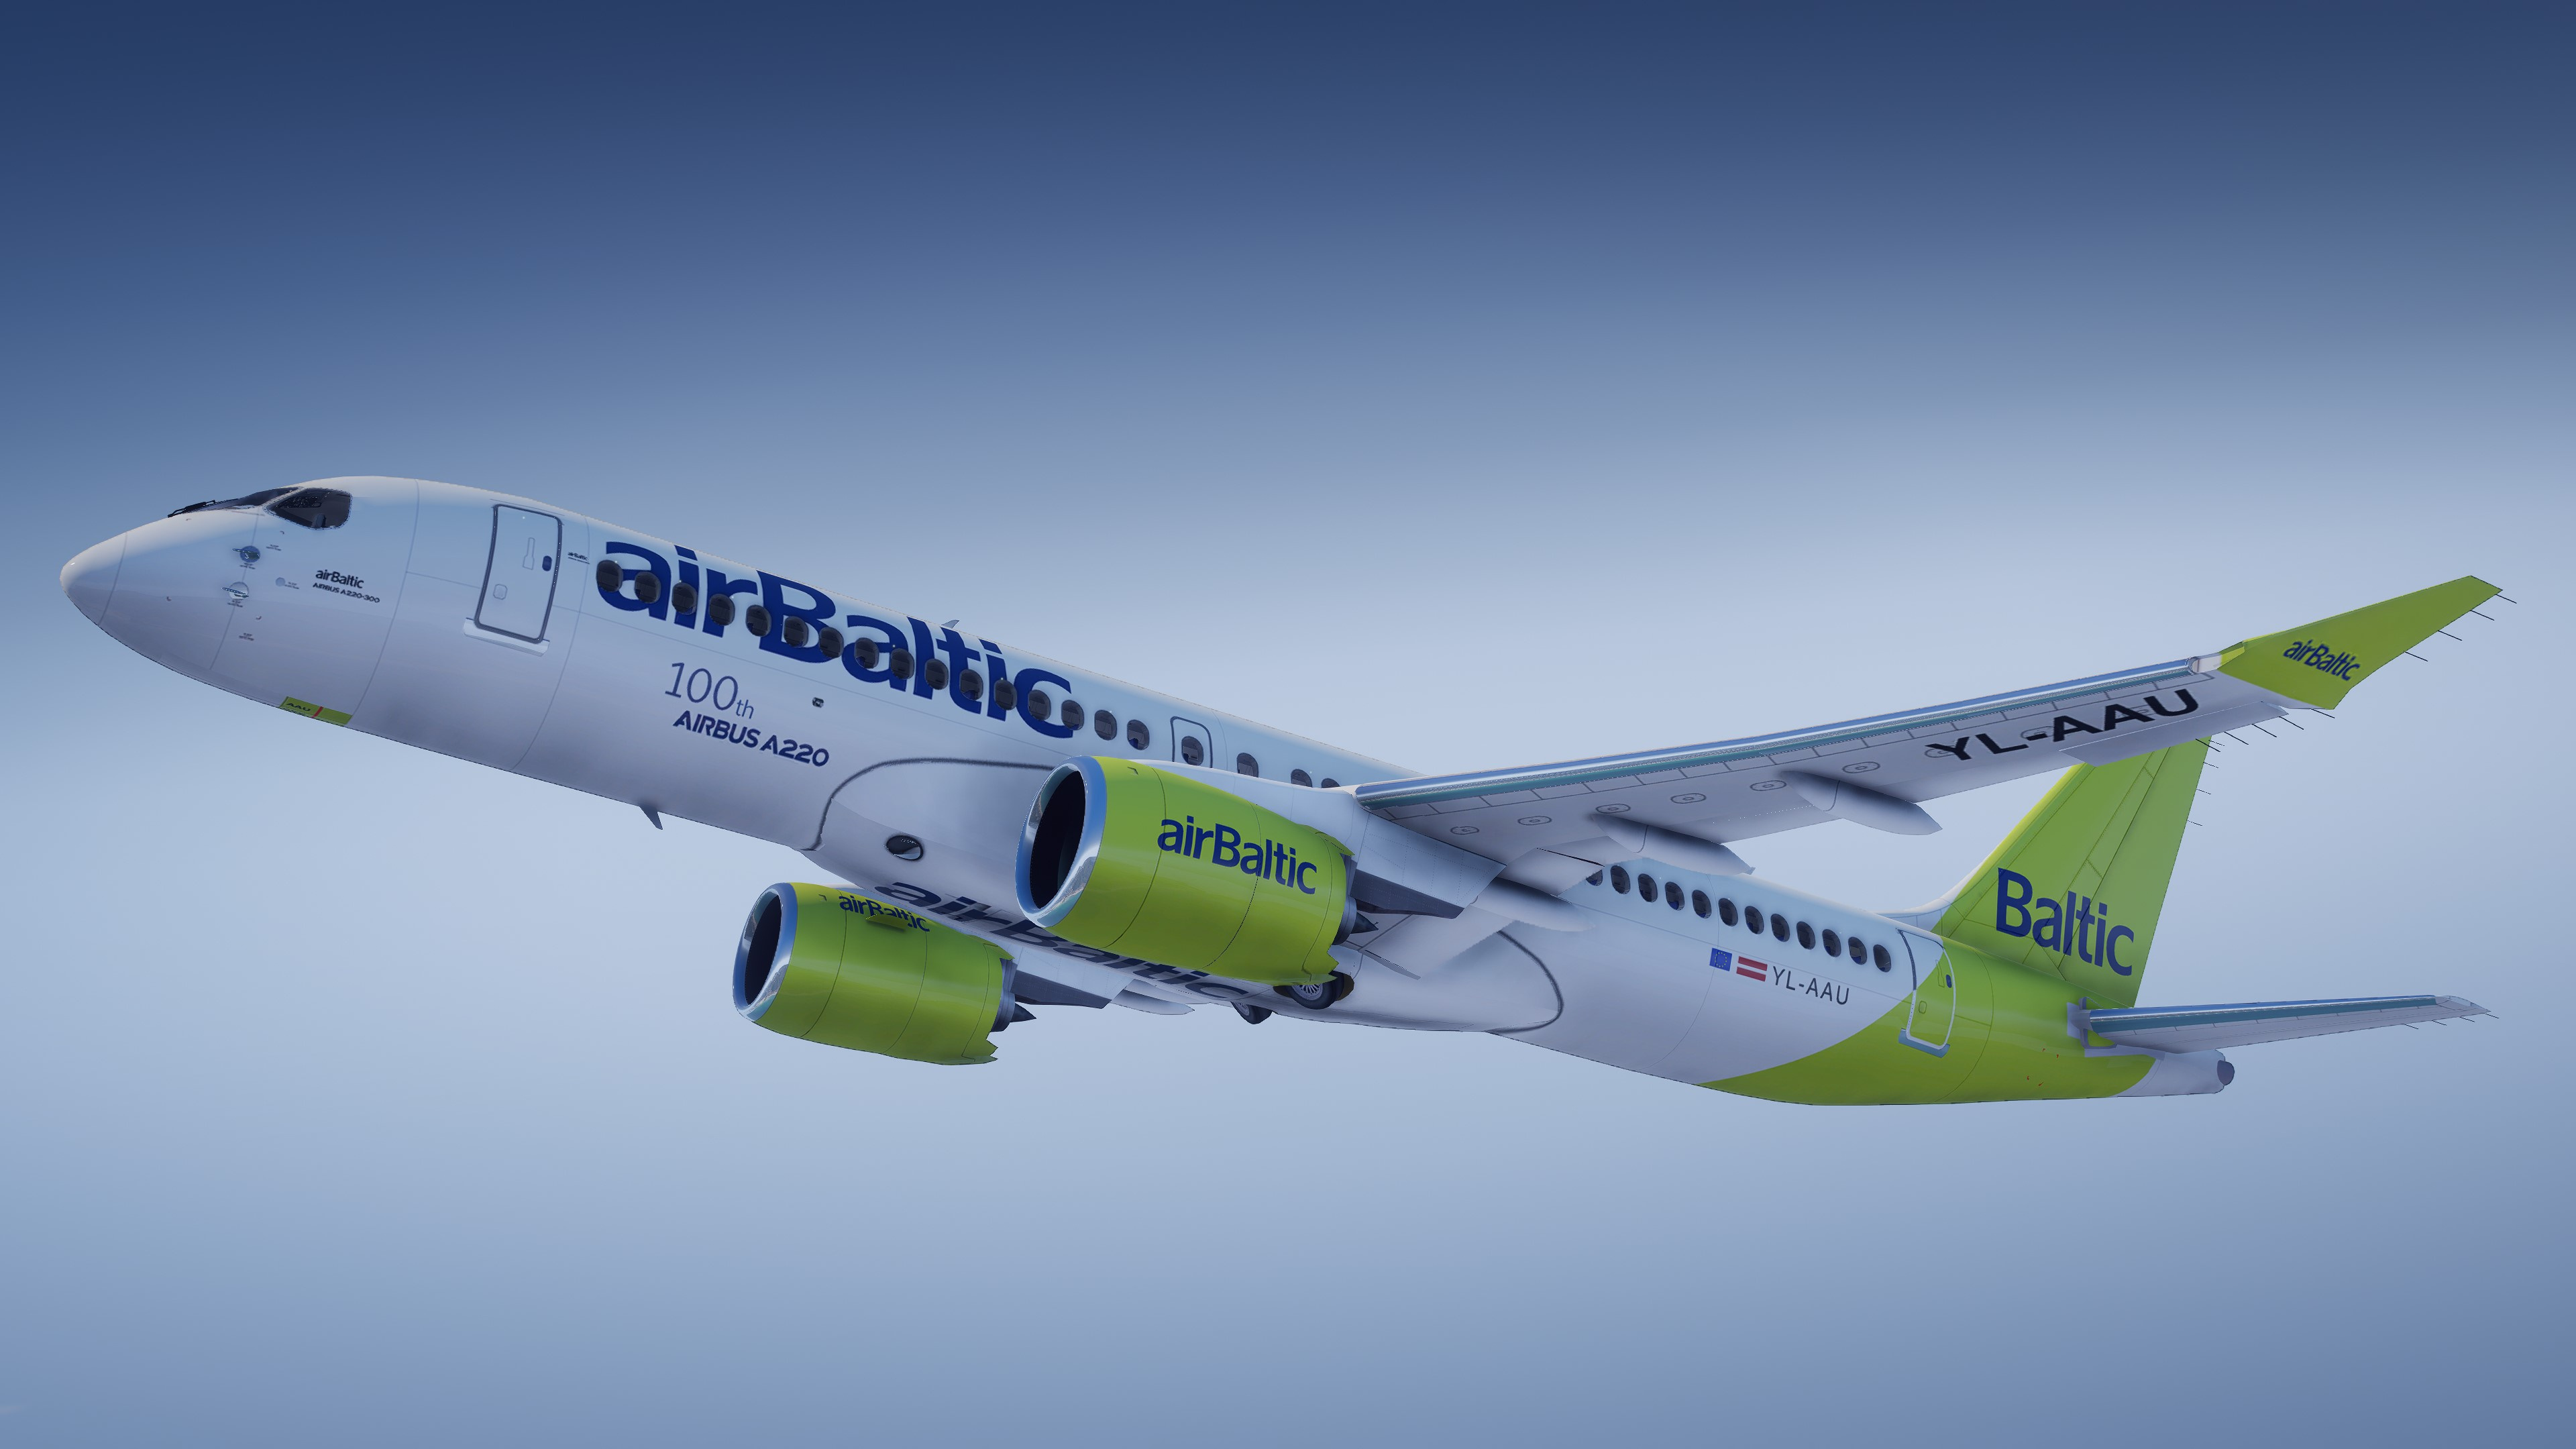 Airbus A220, Airline, Livery Pack, 3840x2160 4K Desktop